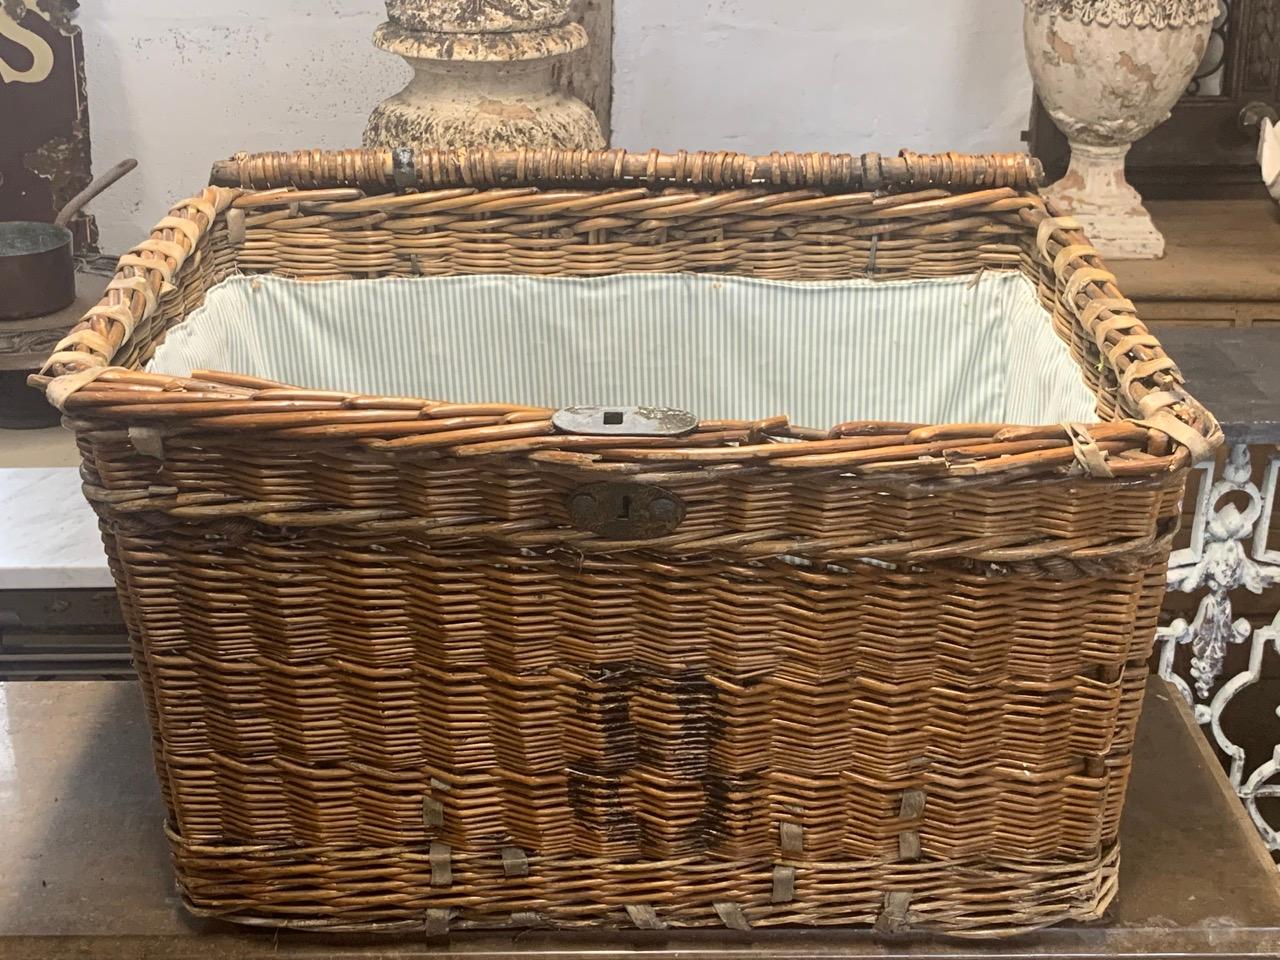 A lovely Victorian wicker basket by T Craven & Sons. With brass makers plate on the front. It has 4 wheels on the base and hinged top. This would make a nice log basket by the fire.